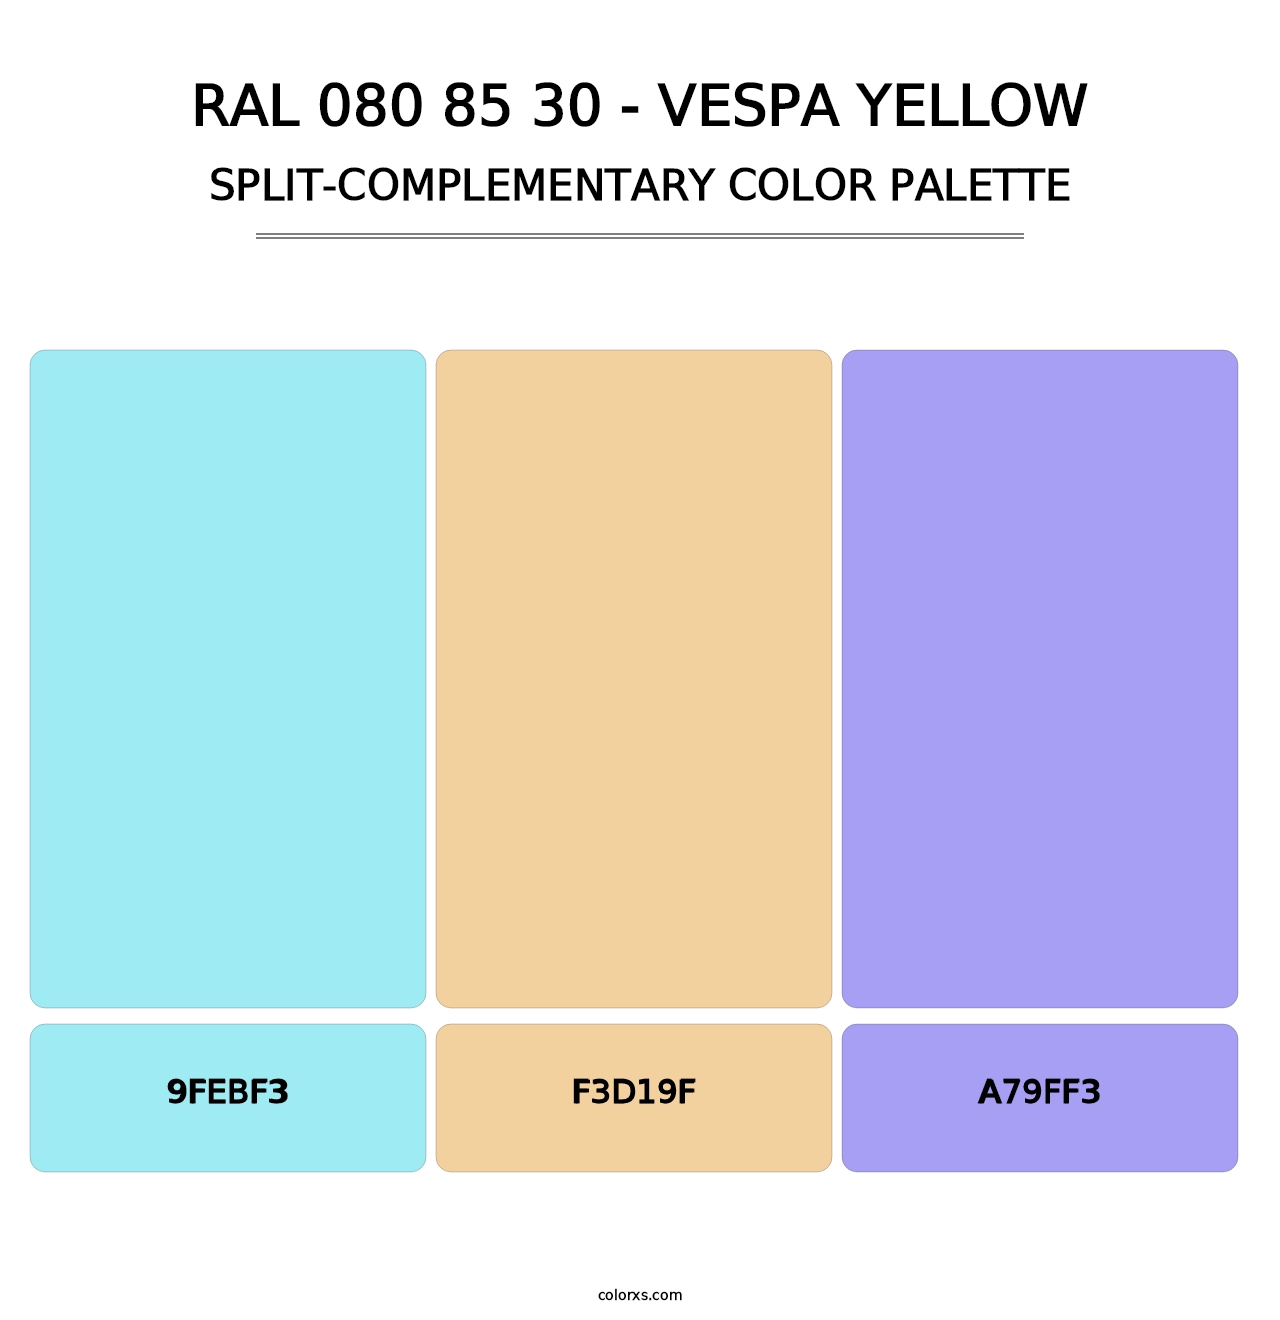 RAL 080 85 30 - Vespa Yellow - Split-Complementary Color Palette